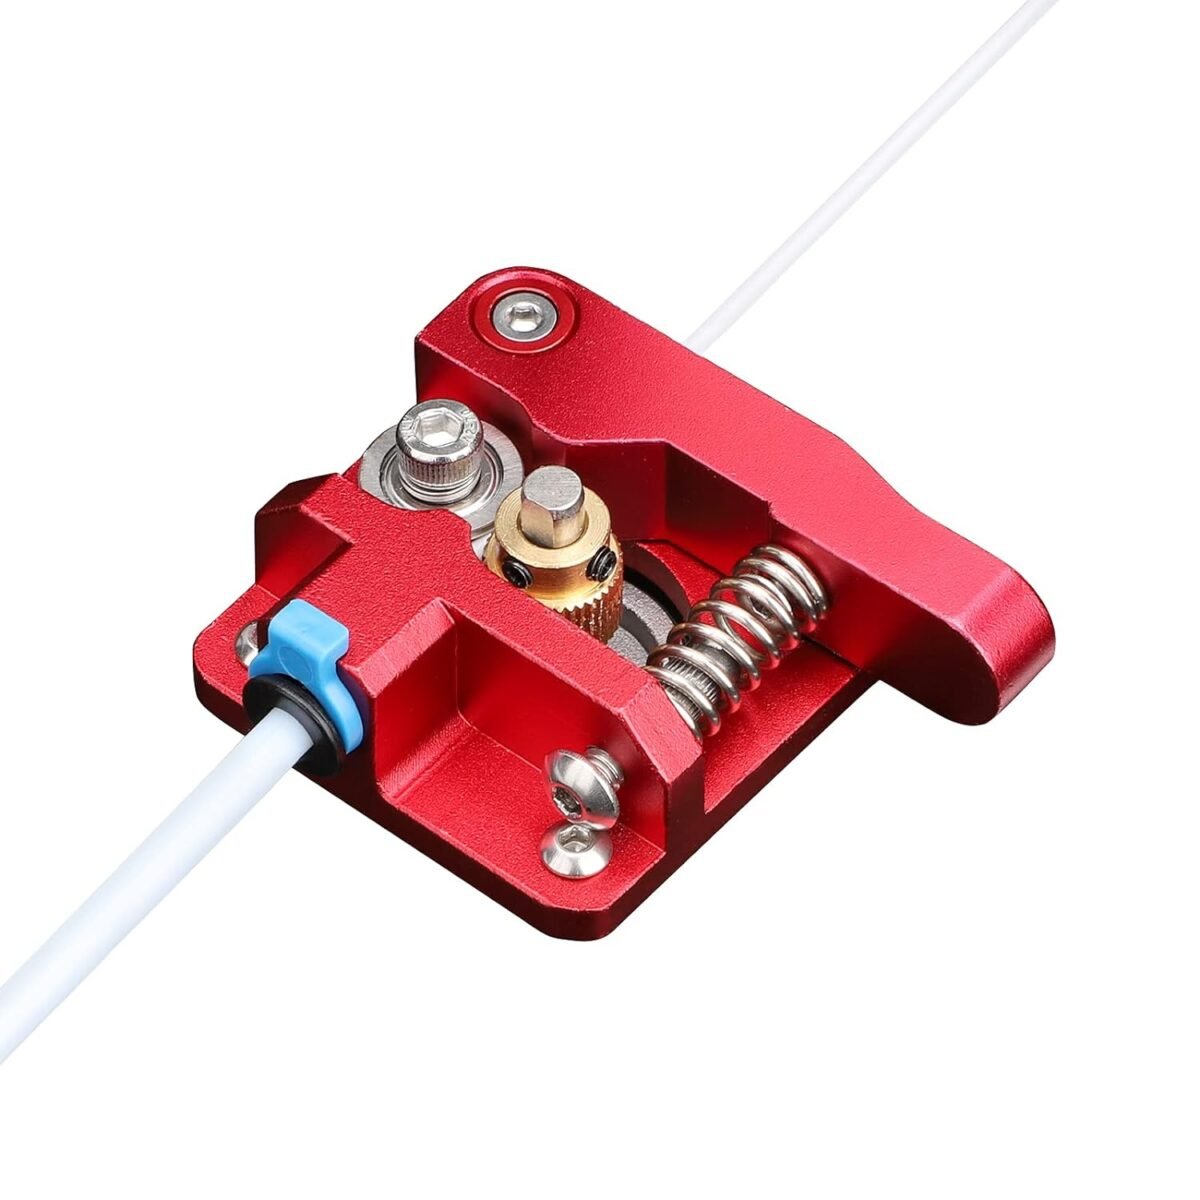 Twotrees CR10 Extruder Upgrade Aluminum Block bowden extruder 1.75mm Filament Reprap Extrusion for Ender 3 CR10 CR10S PRO